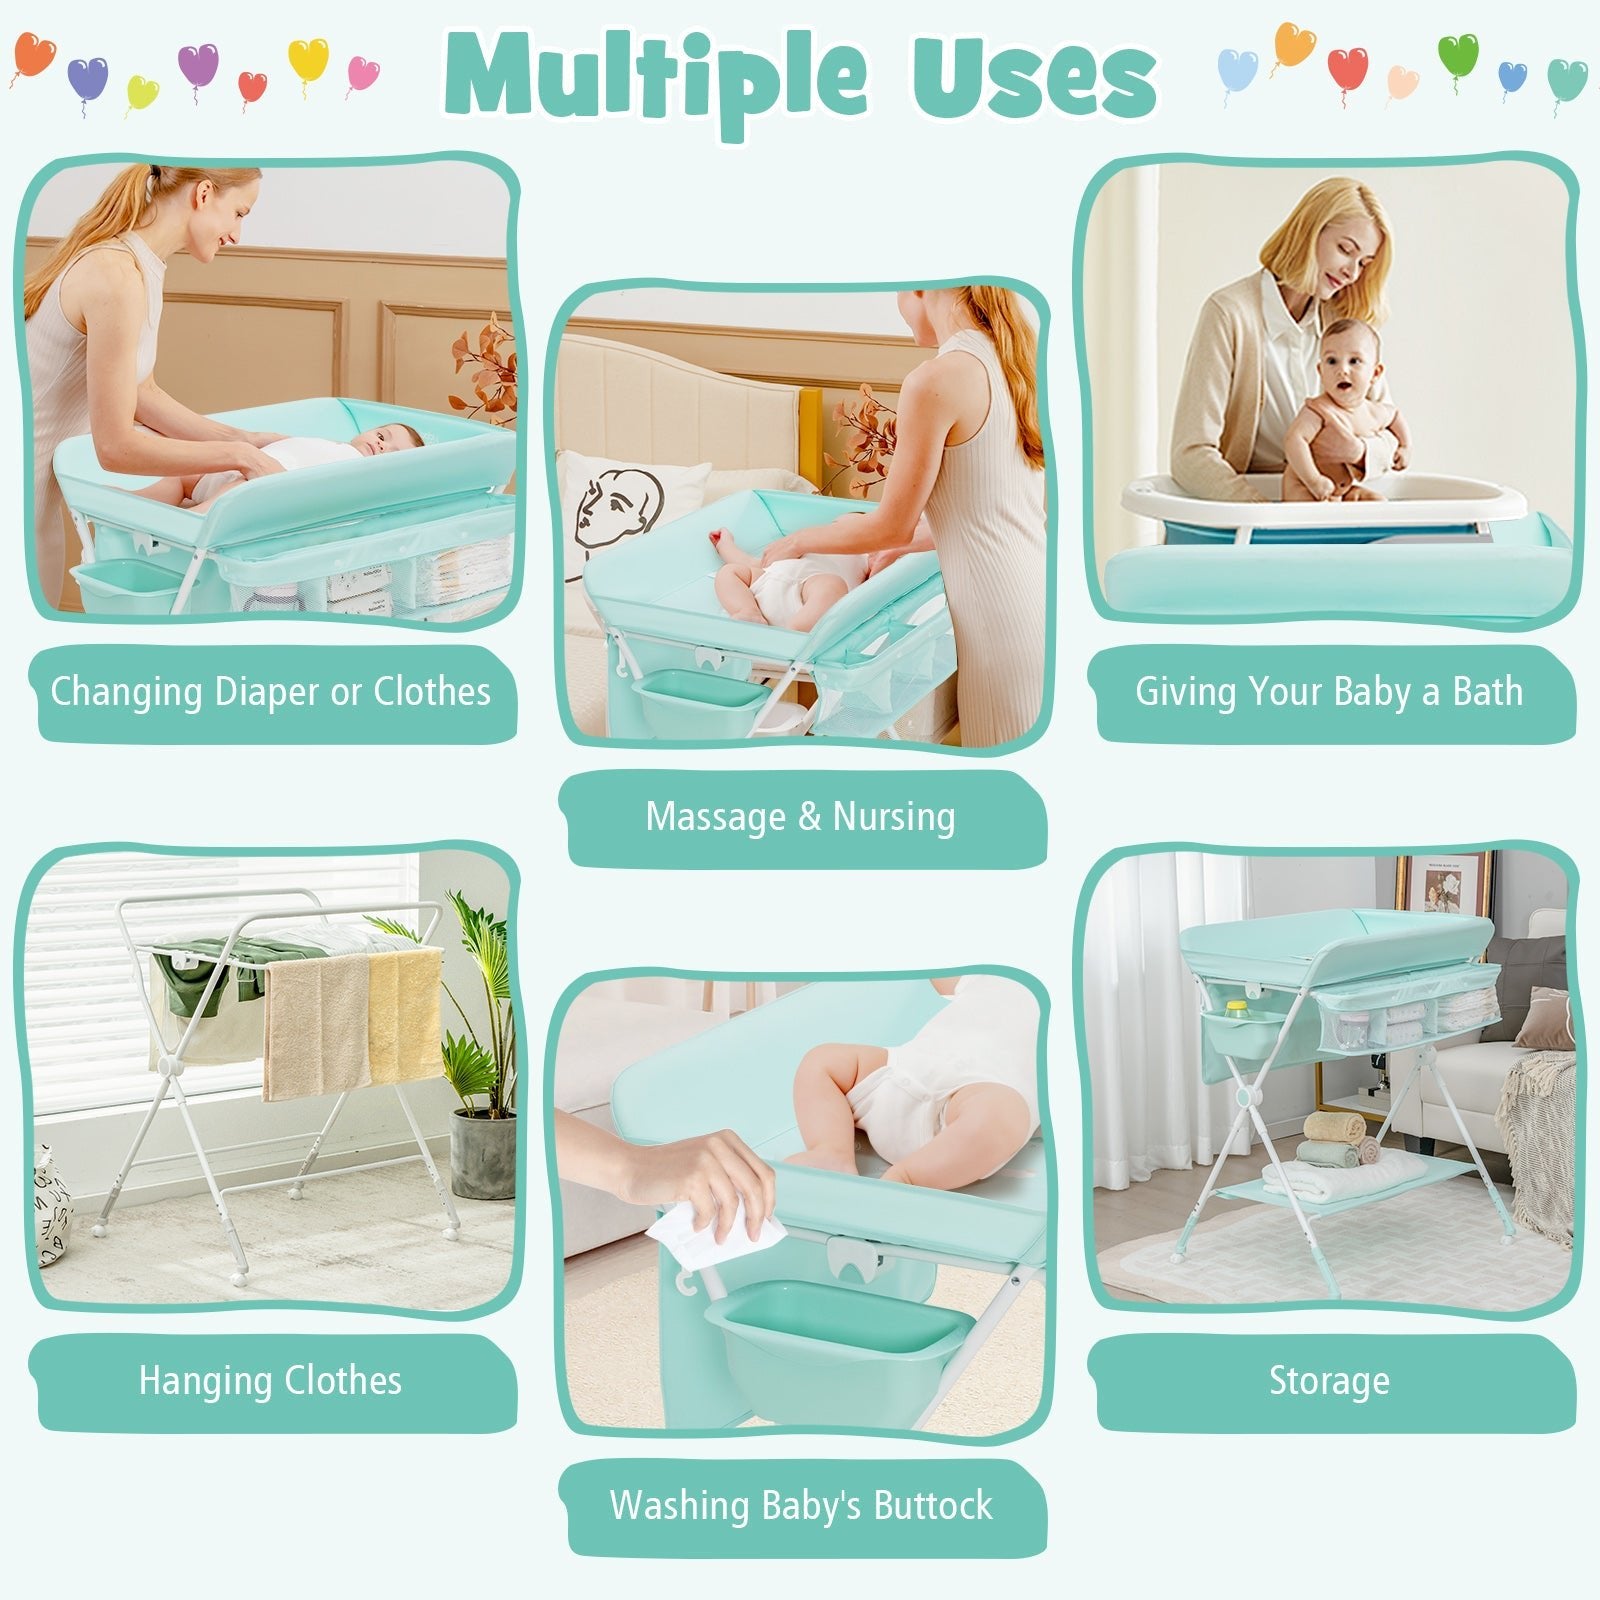 1Portable Folding Changing Table - Nursery Convenience for Infants